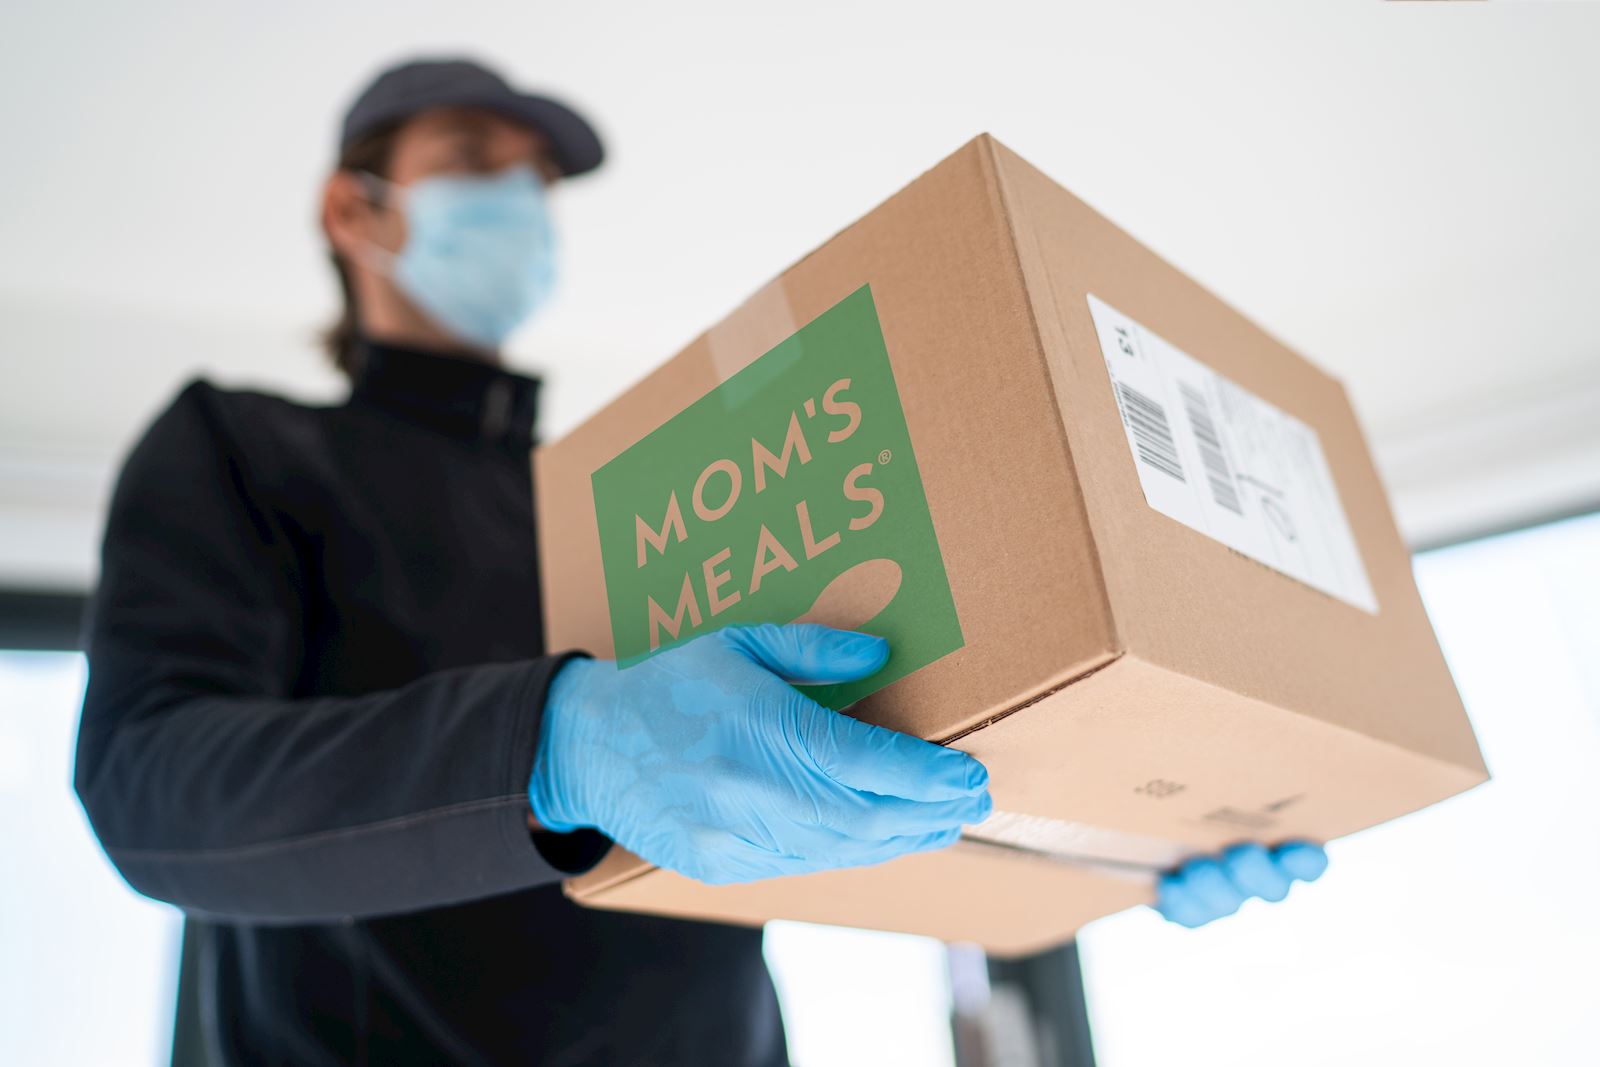 What to look for when choosing a meal delivery service